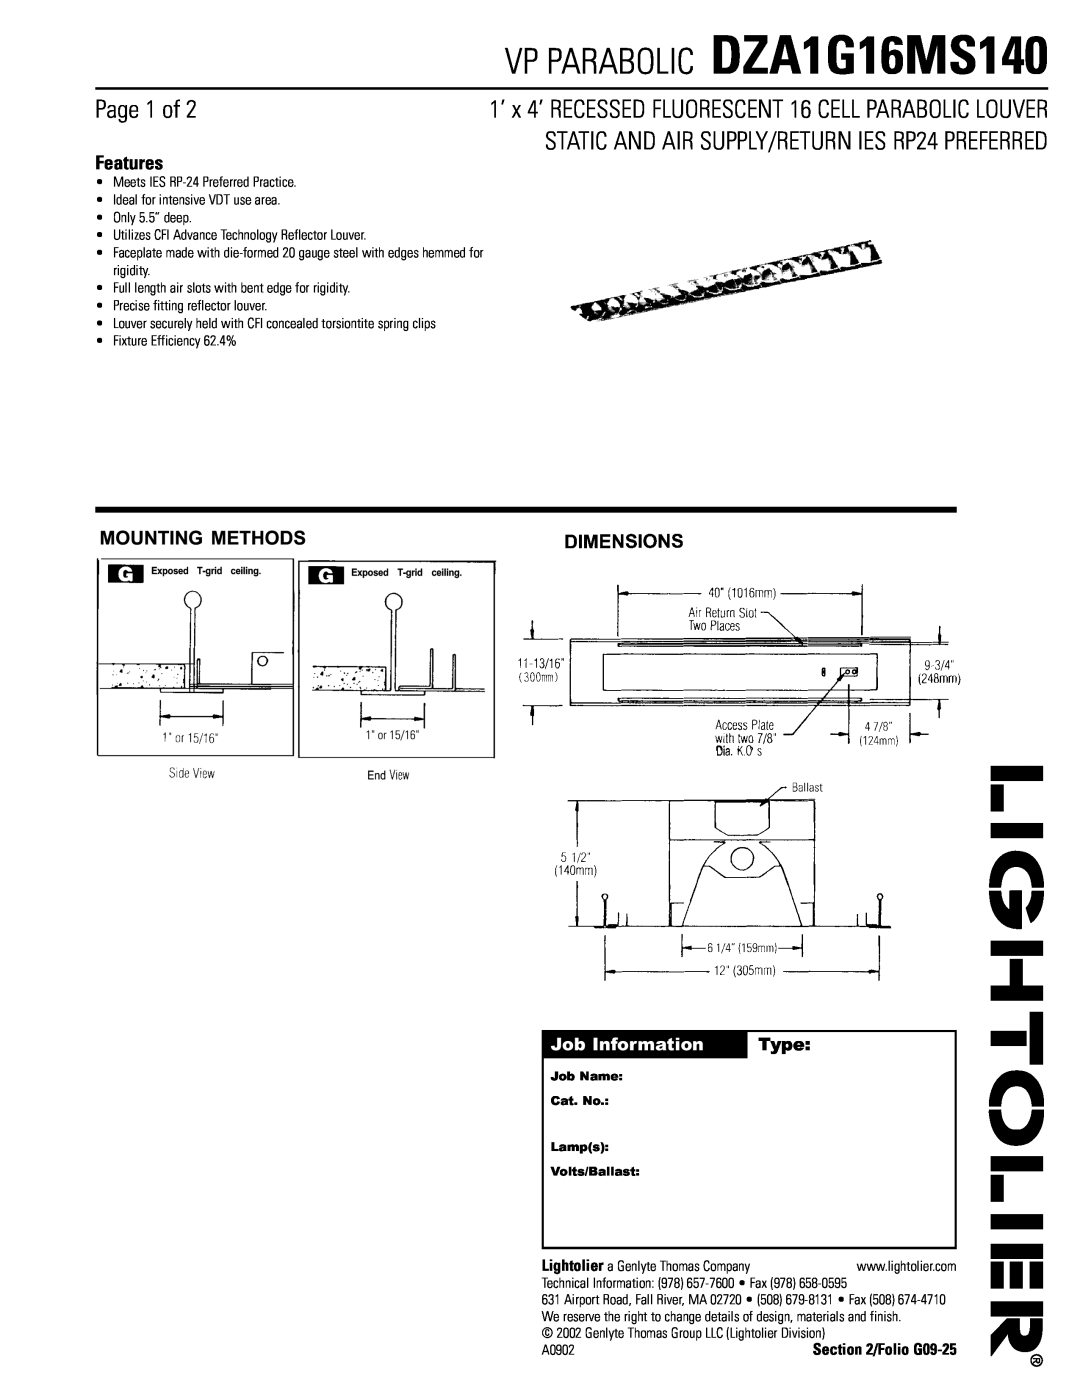 Lightolier manual VP PARABOLIC DZA1G16MS140, Page 1 of, Features, STATIC AND AIR SUPPLY/RETURN IES RP24 PREFERRED, Type 